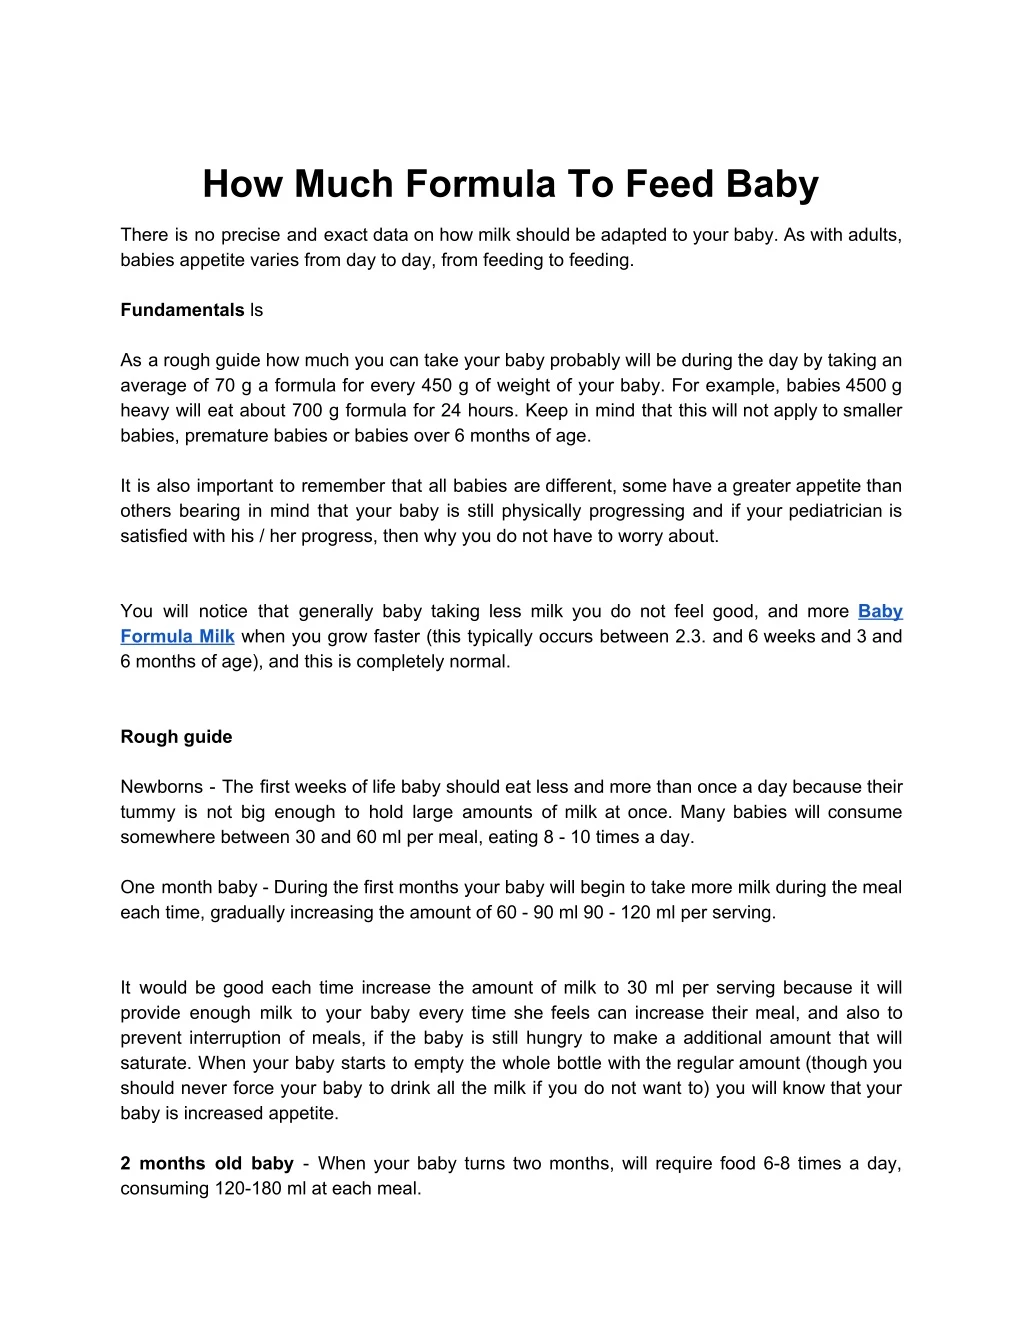 how much formula to feed baby